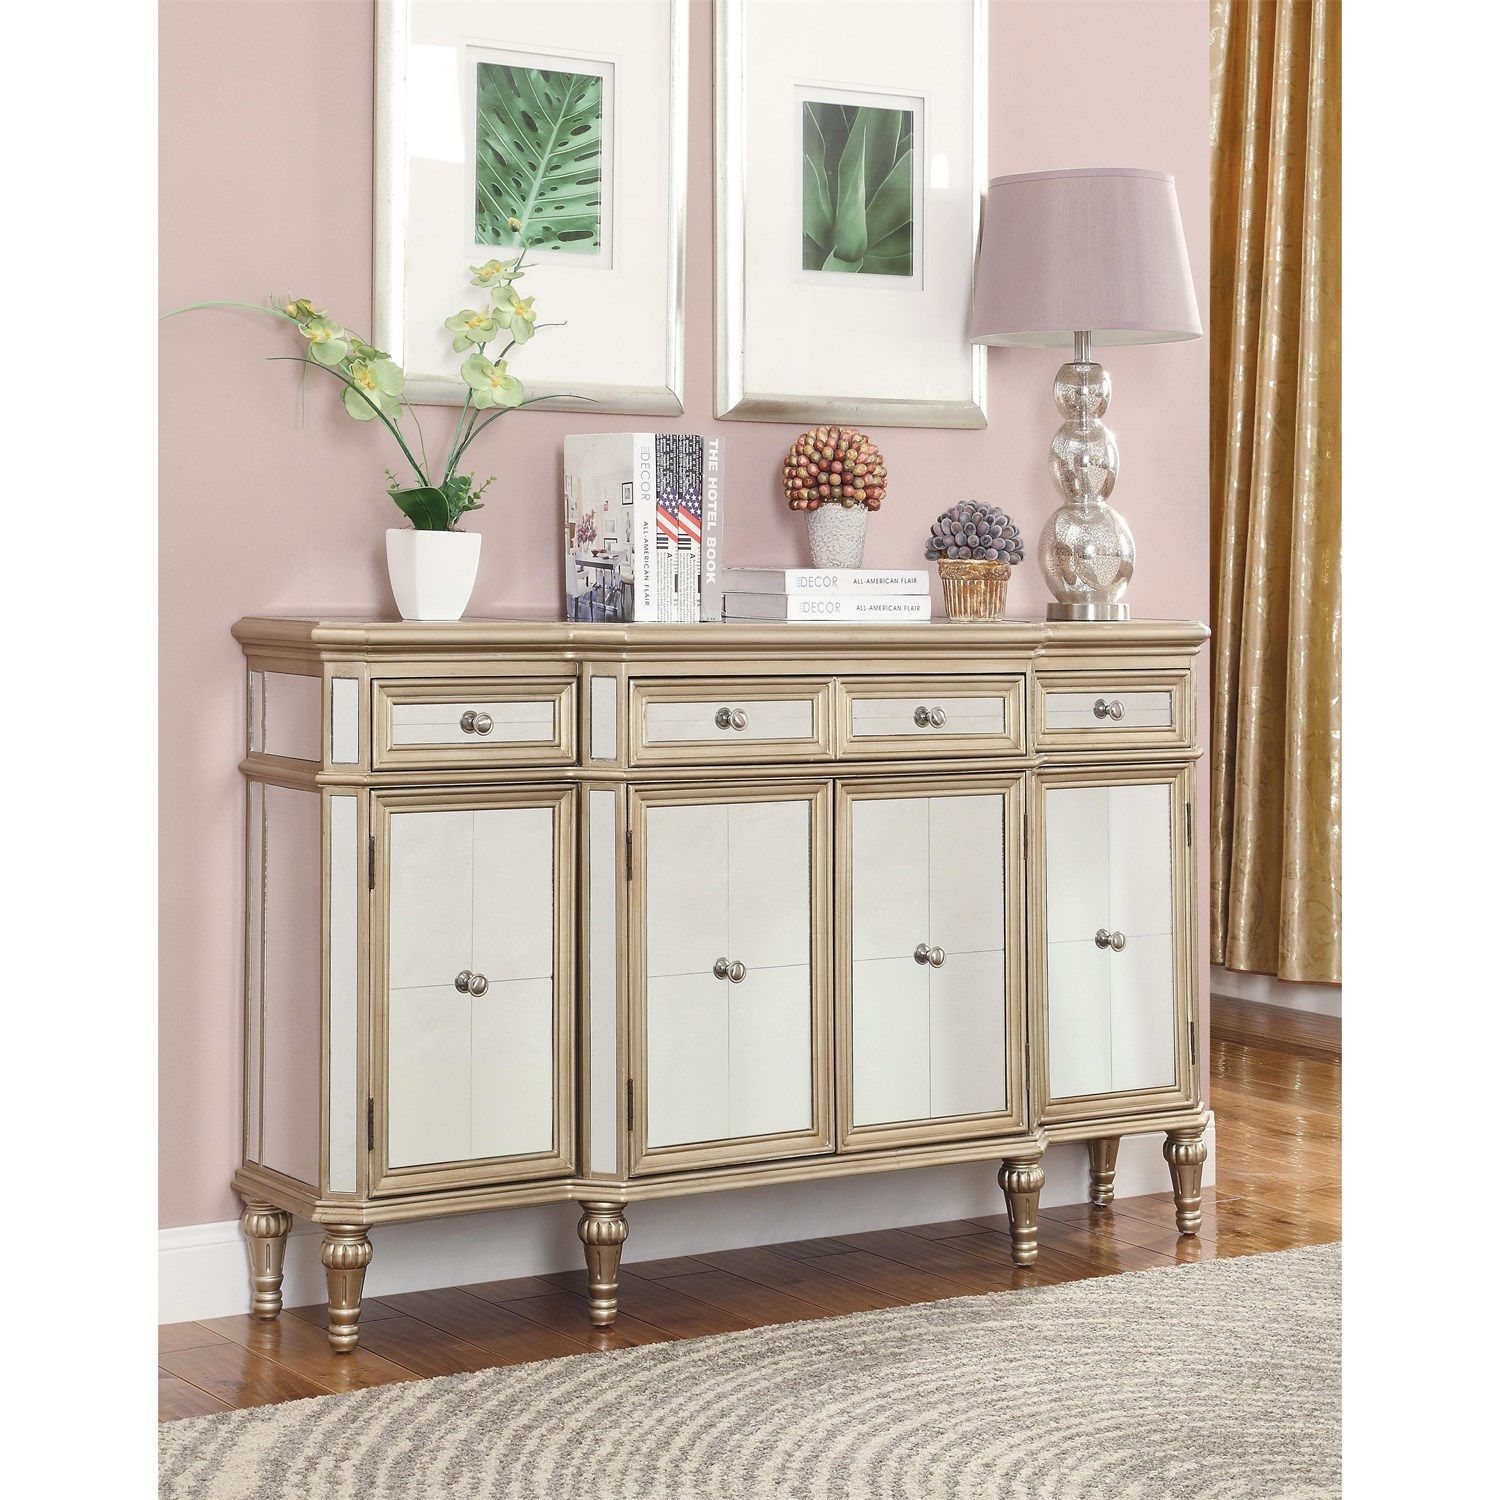 Coast To Coast 56326 60" Door Drawer Credenza In Estaline Intended For 2017 Raquette Sideboards (View 14 of 20)